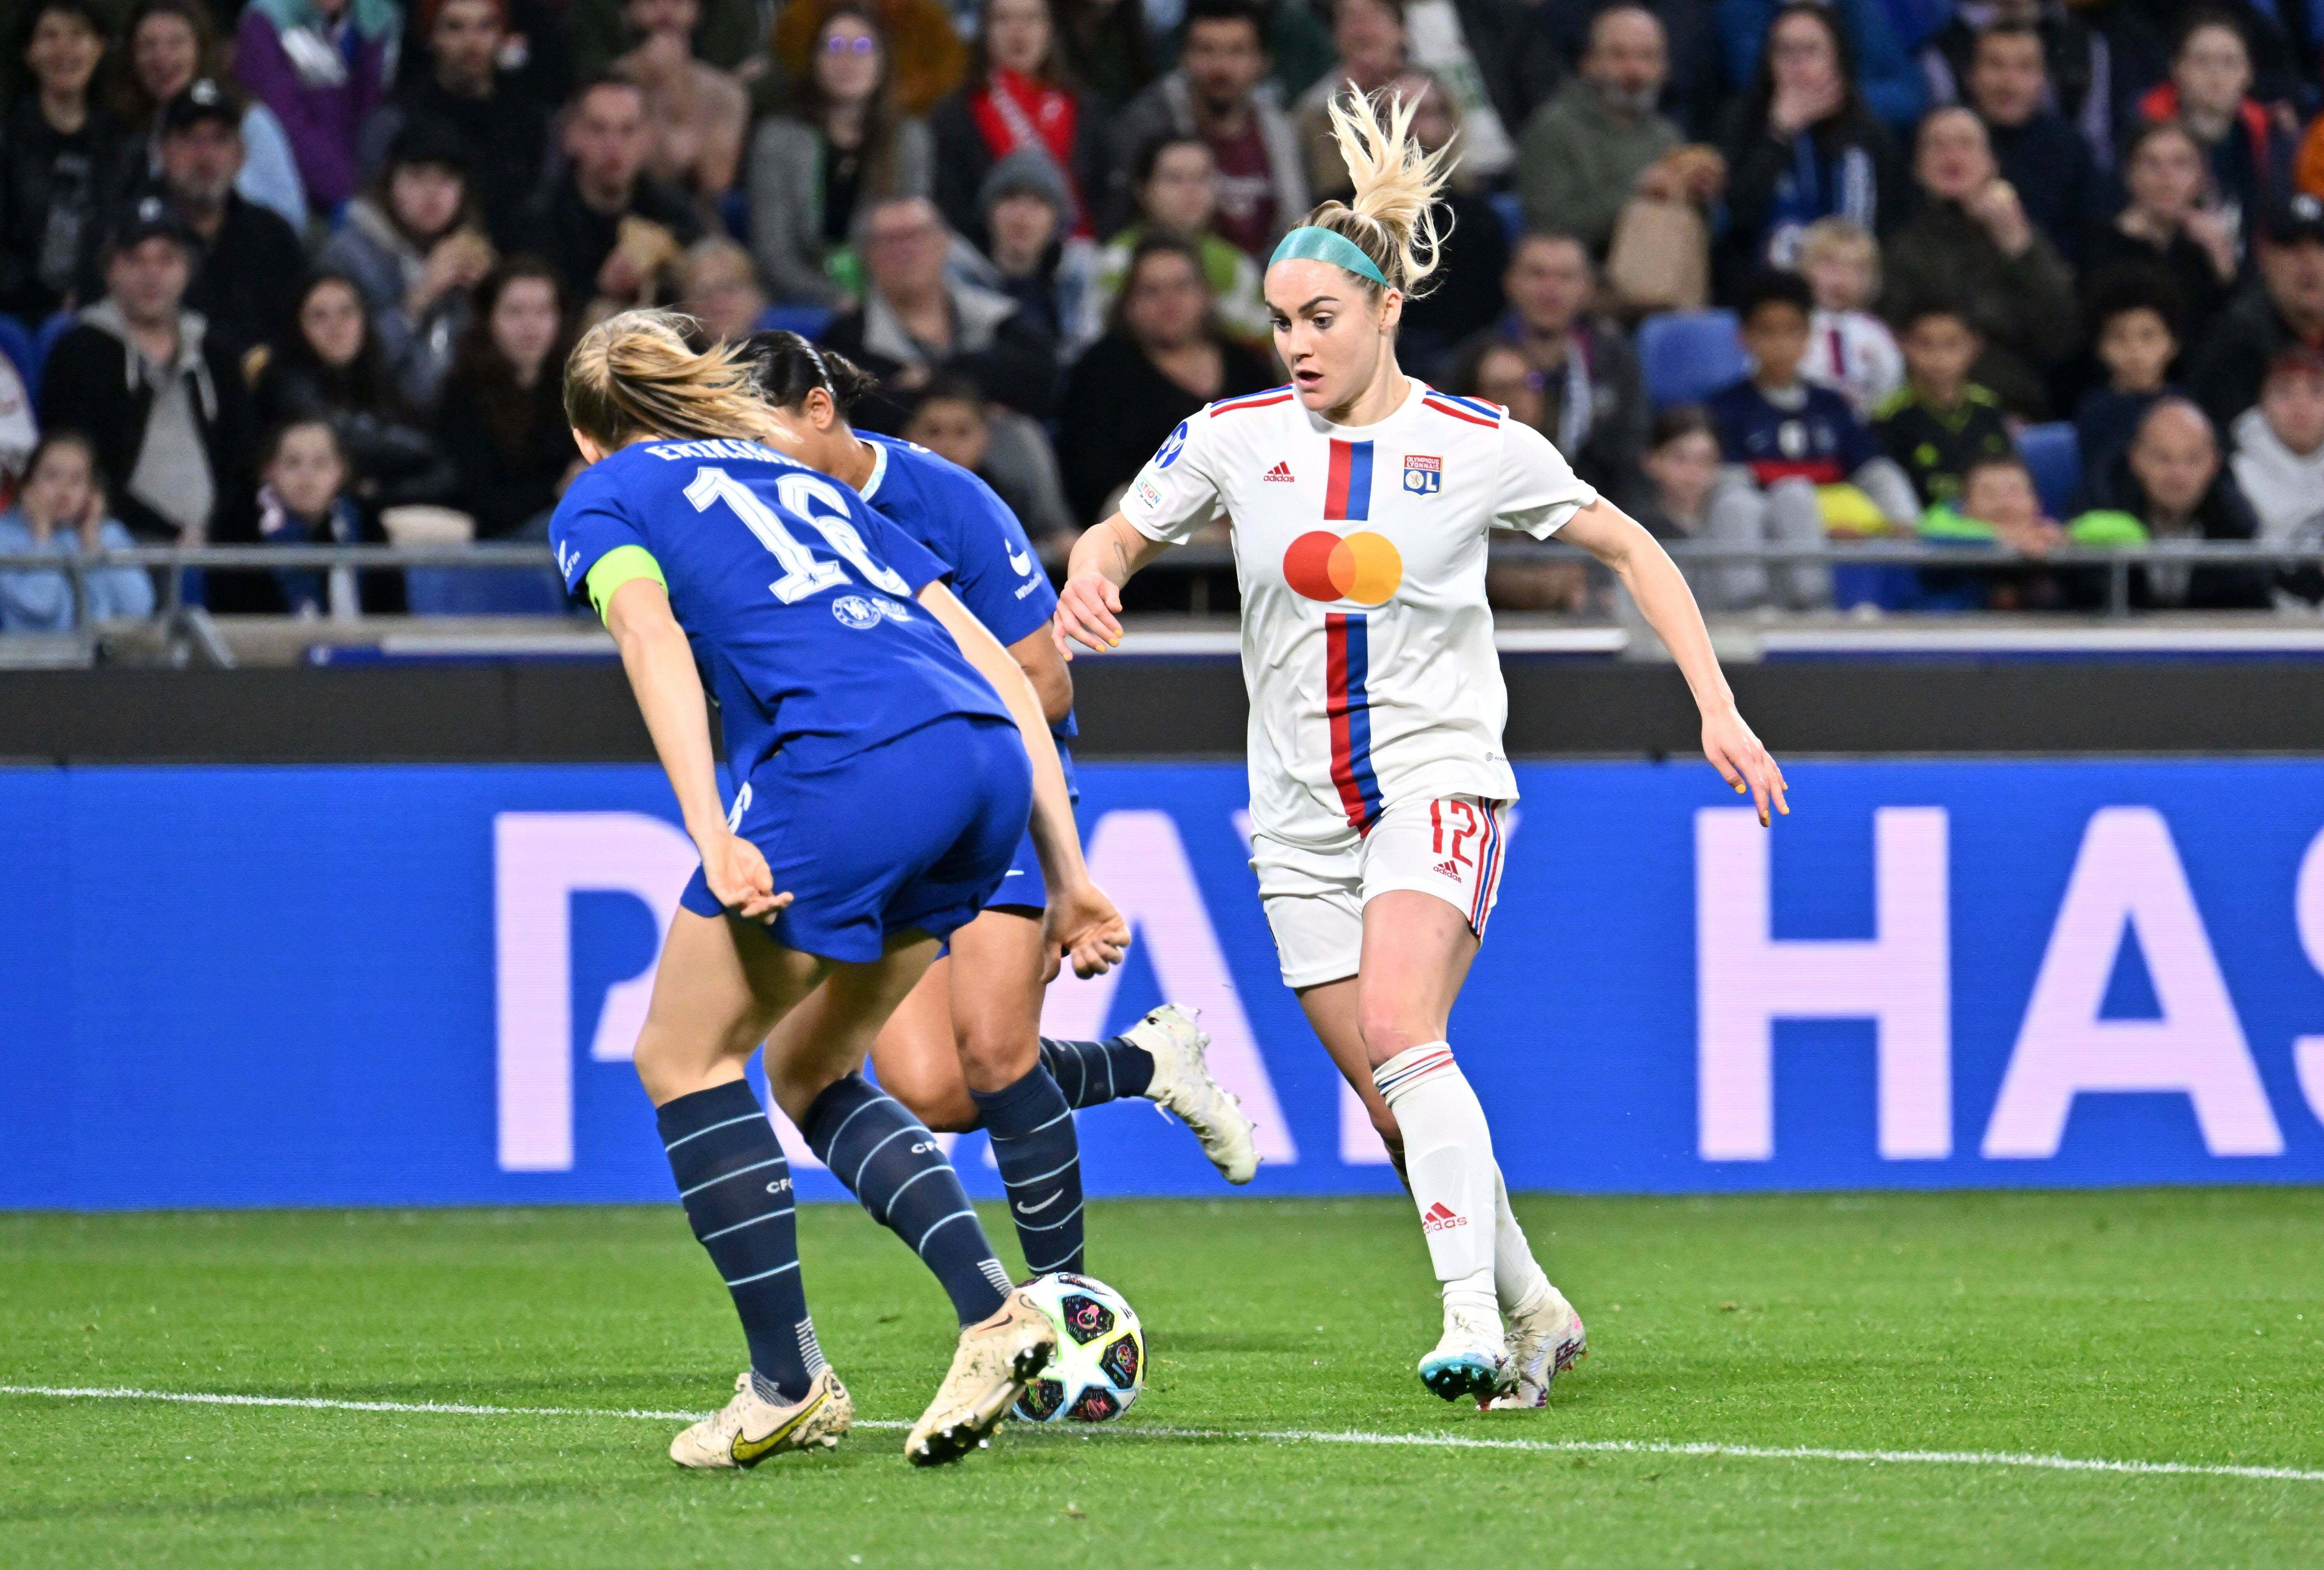 Ellie CARPENTER of Lyon during the Women's Champions League match between Lyon and Chelsea on March 22, 2023 in Lyon, France.